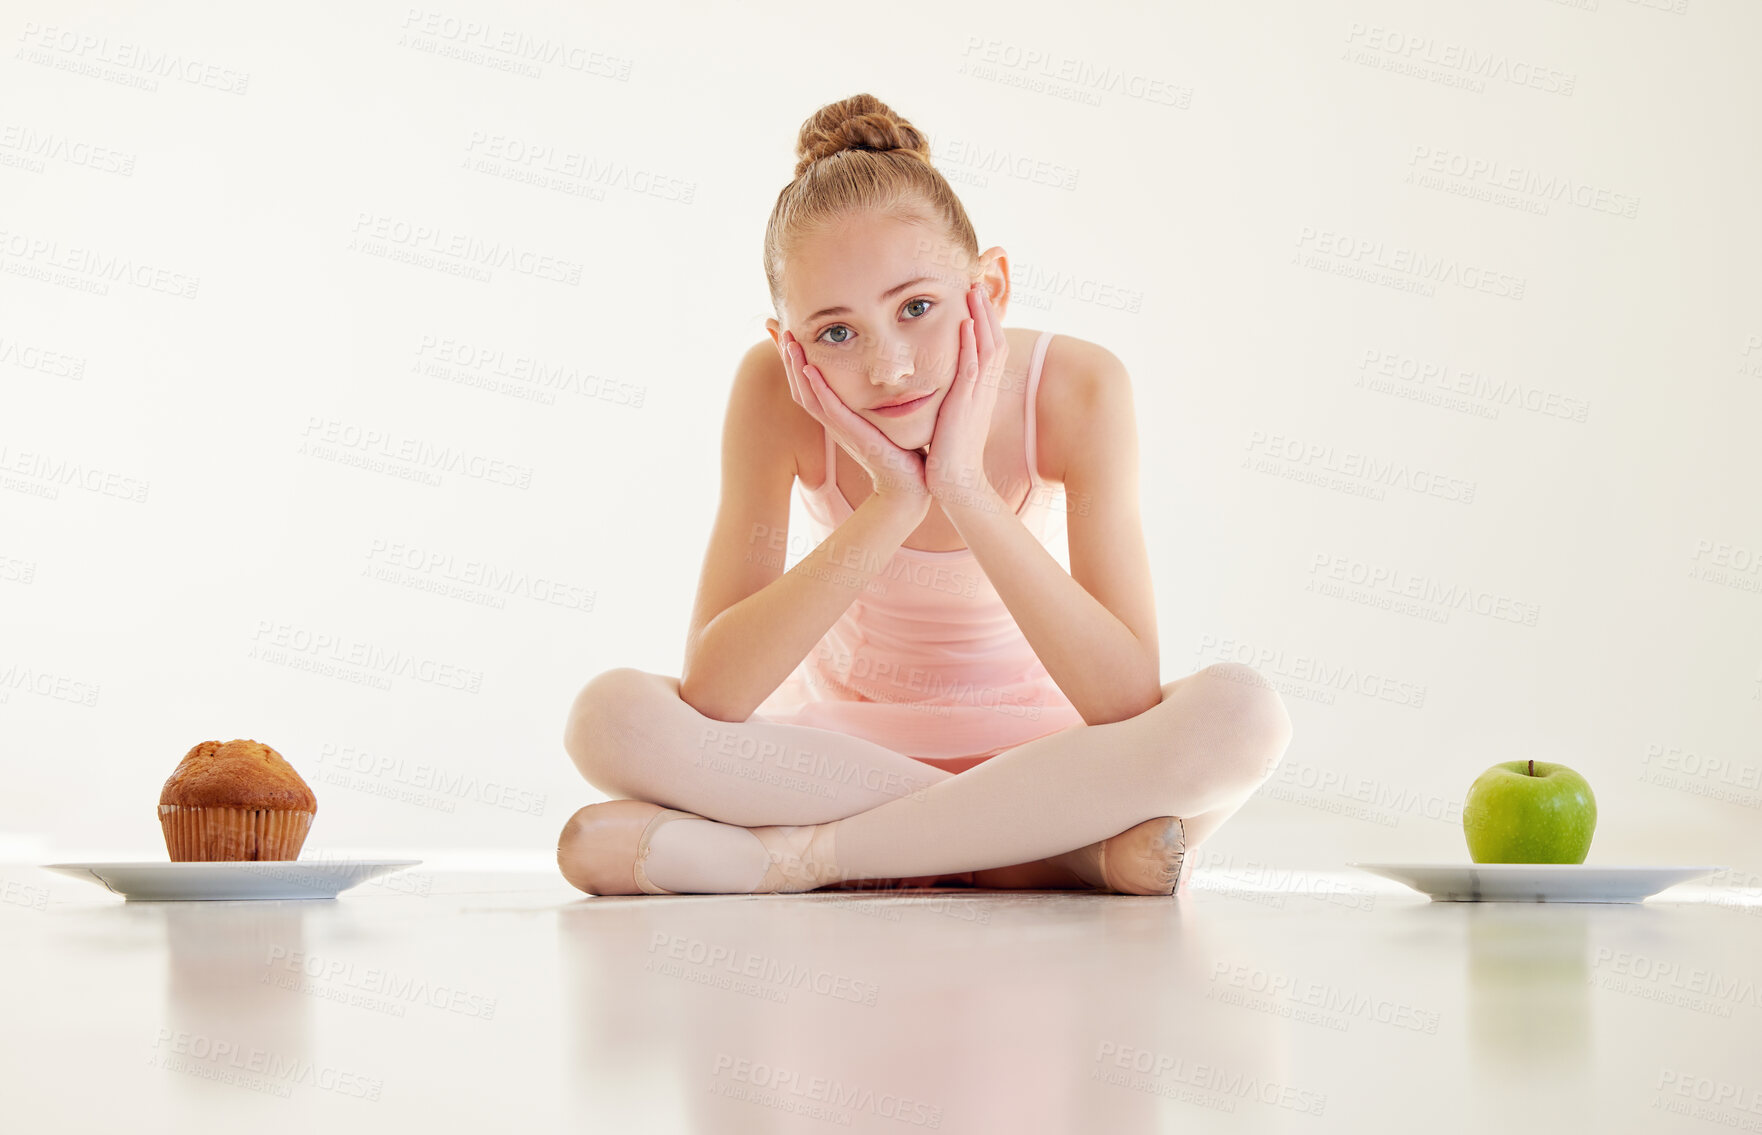 Buy stock photo Shot of a young ballerina  deciding what to eat in a studio